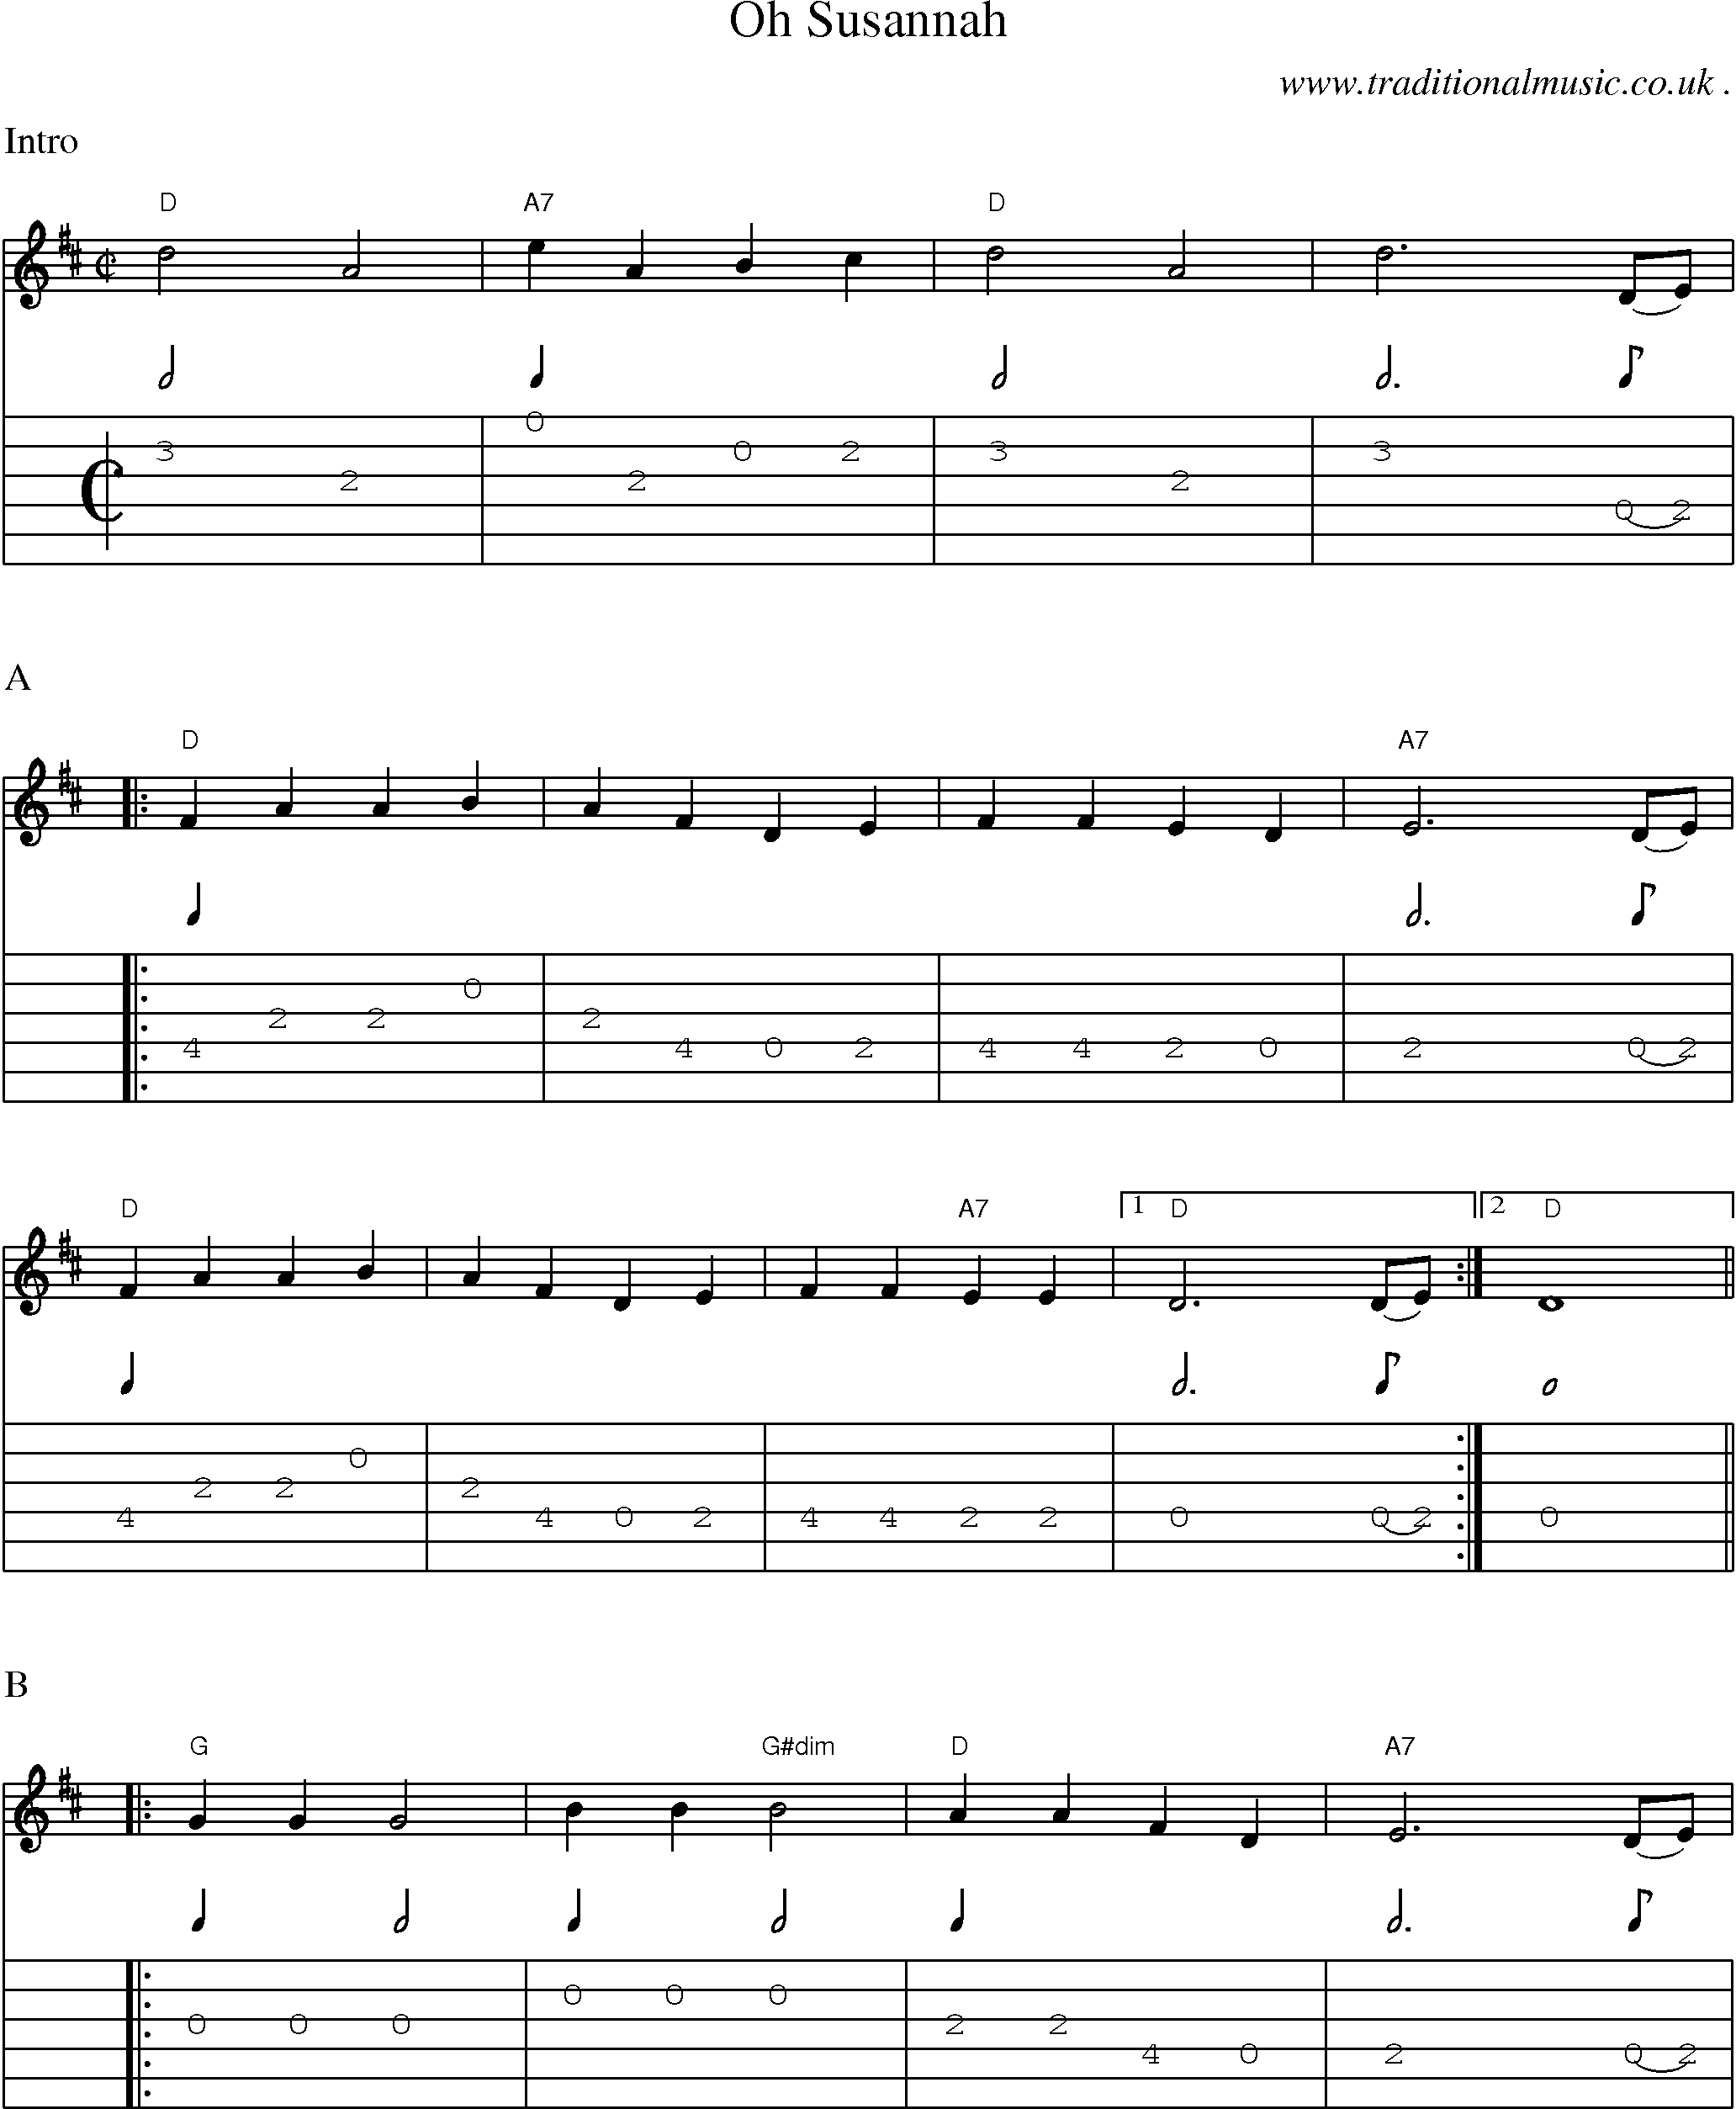 Music Score and Guitar Tabs for Oh Susannah